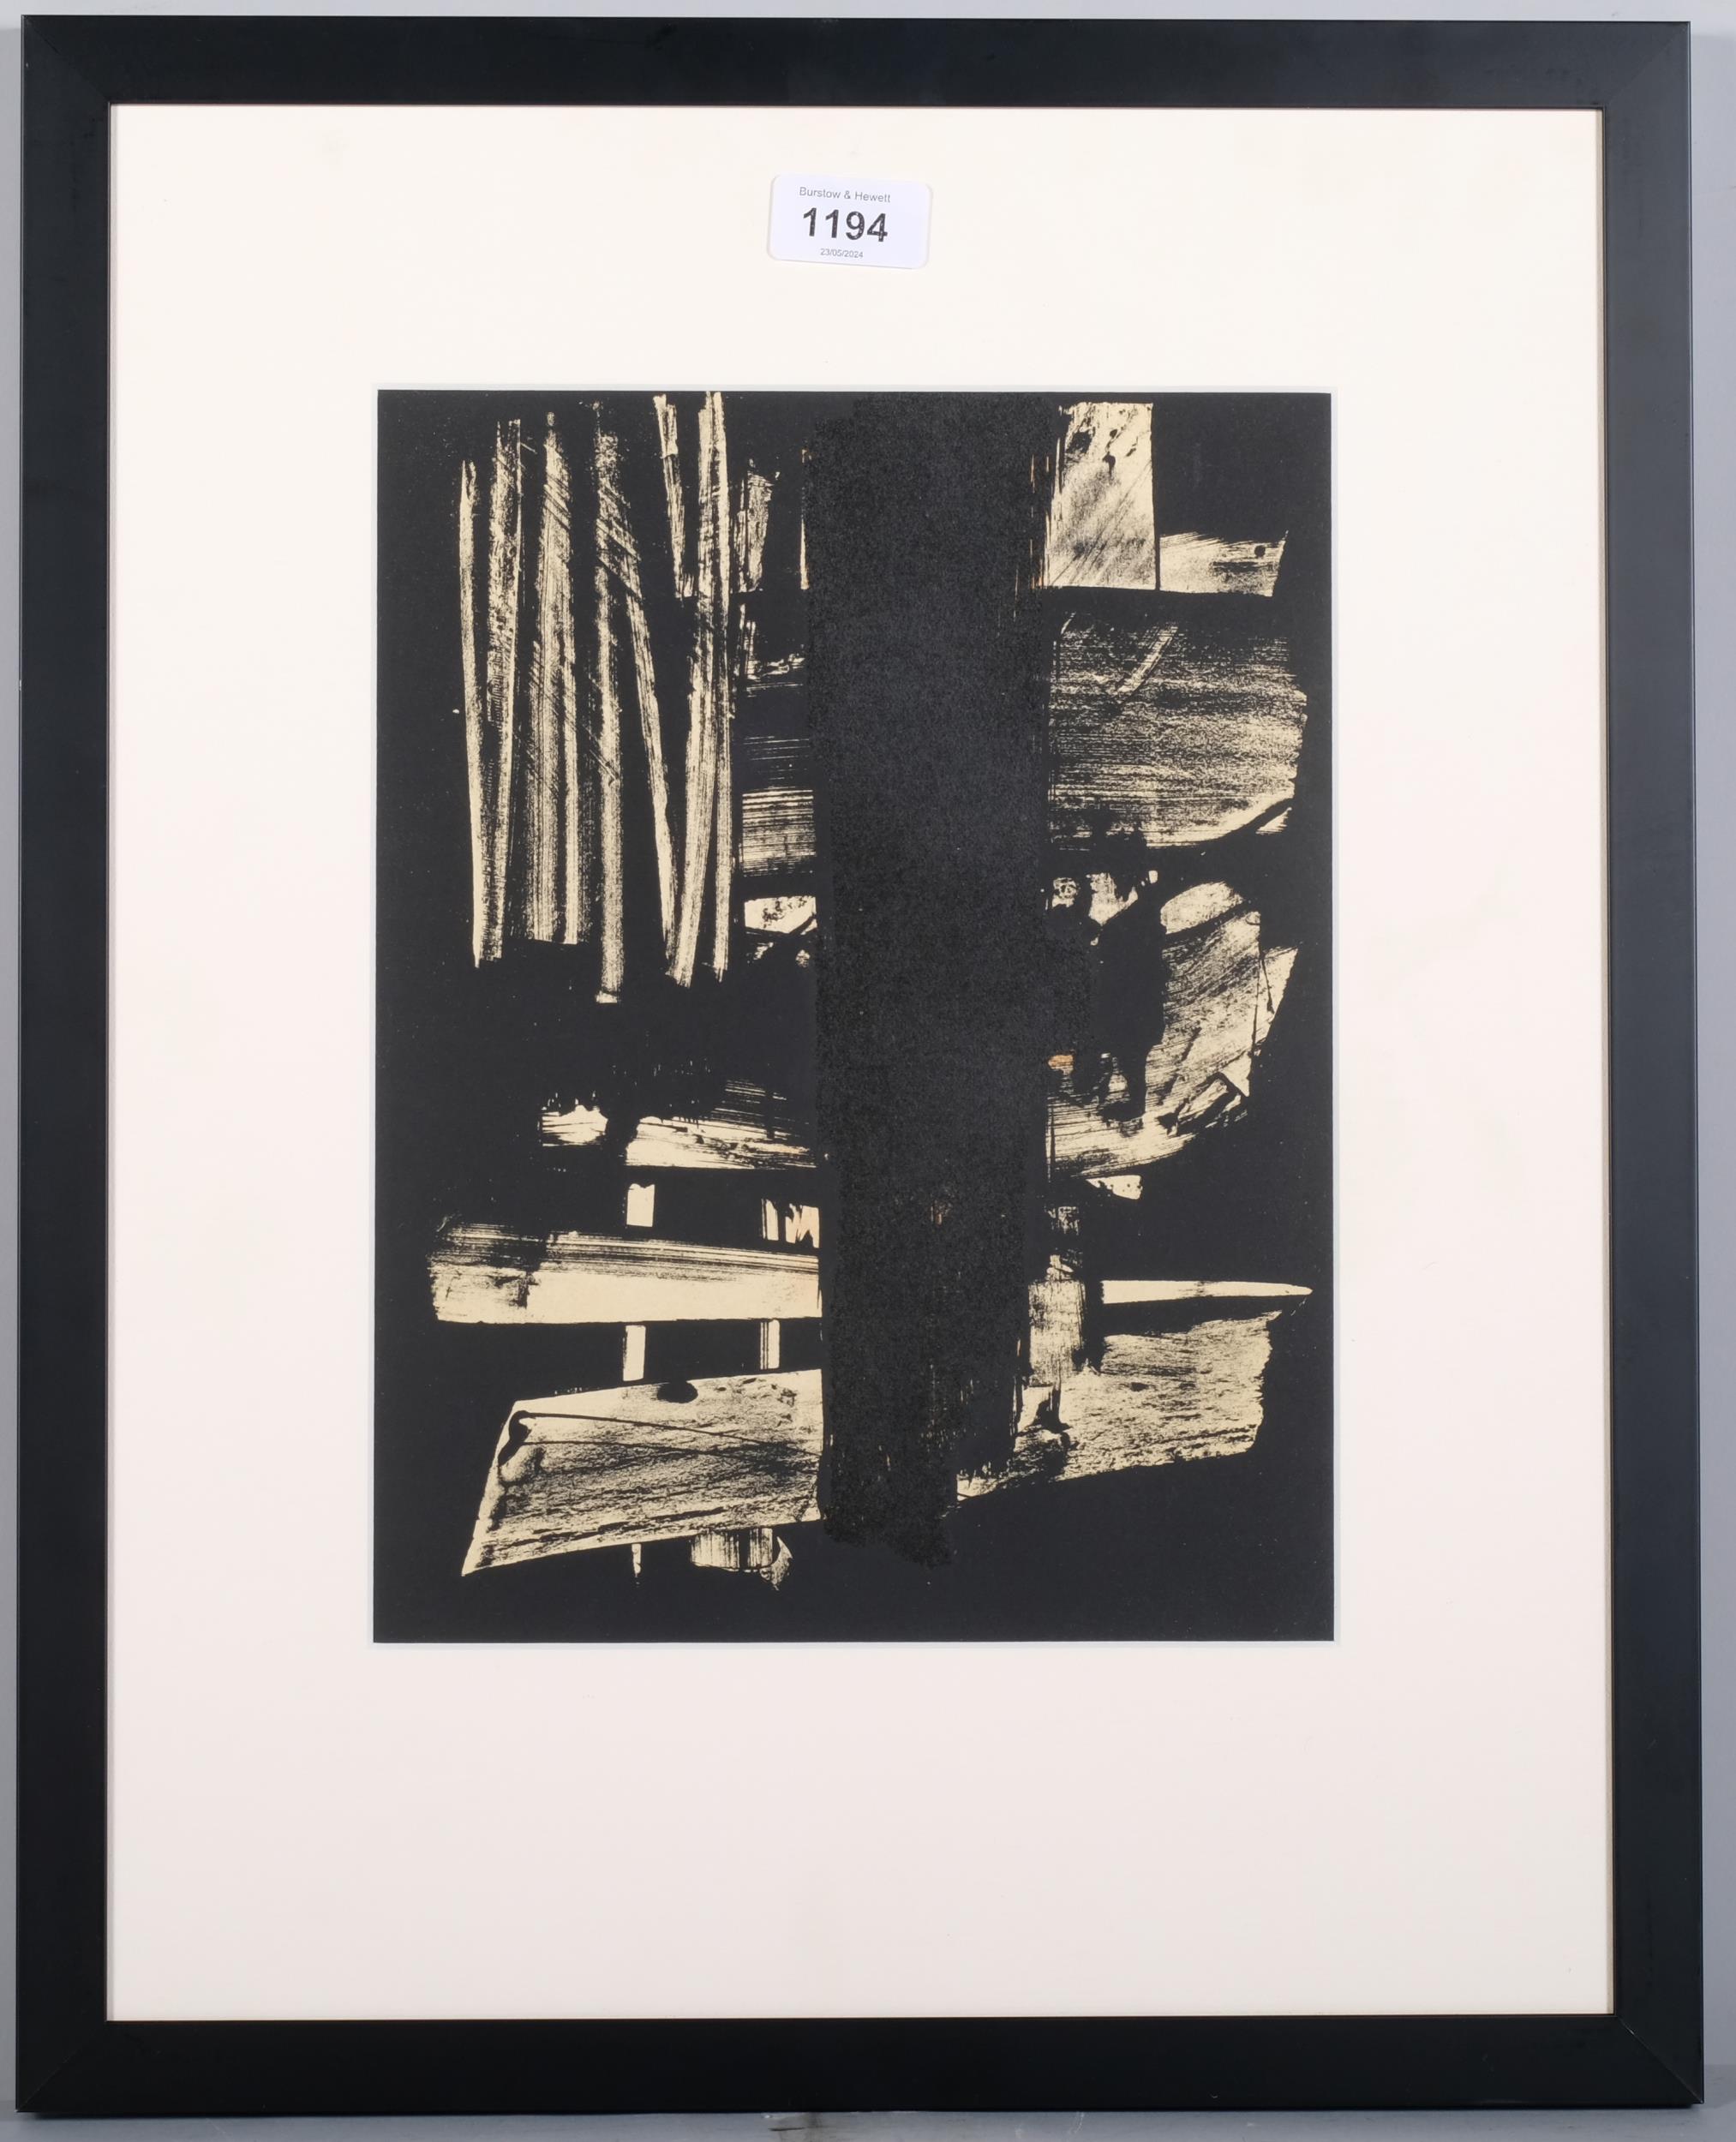 Pierre Soulages, abstract, lithograph no. 9, issued XX Siecle 1959, 30cm x 23cm, framed Good - Image 2 of 4